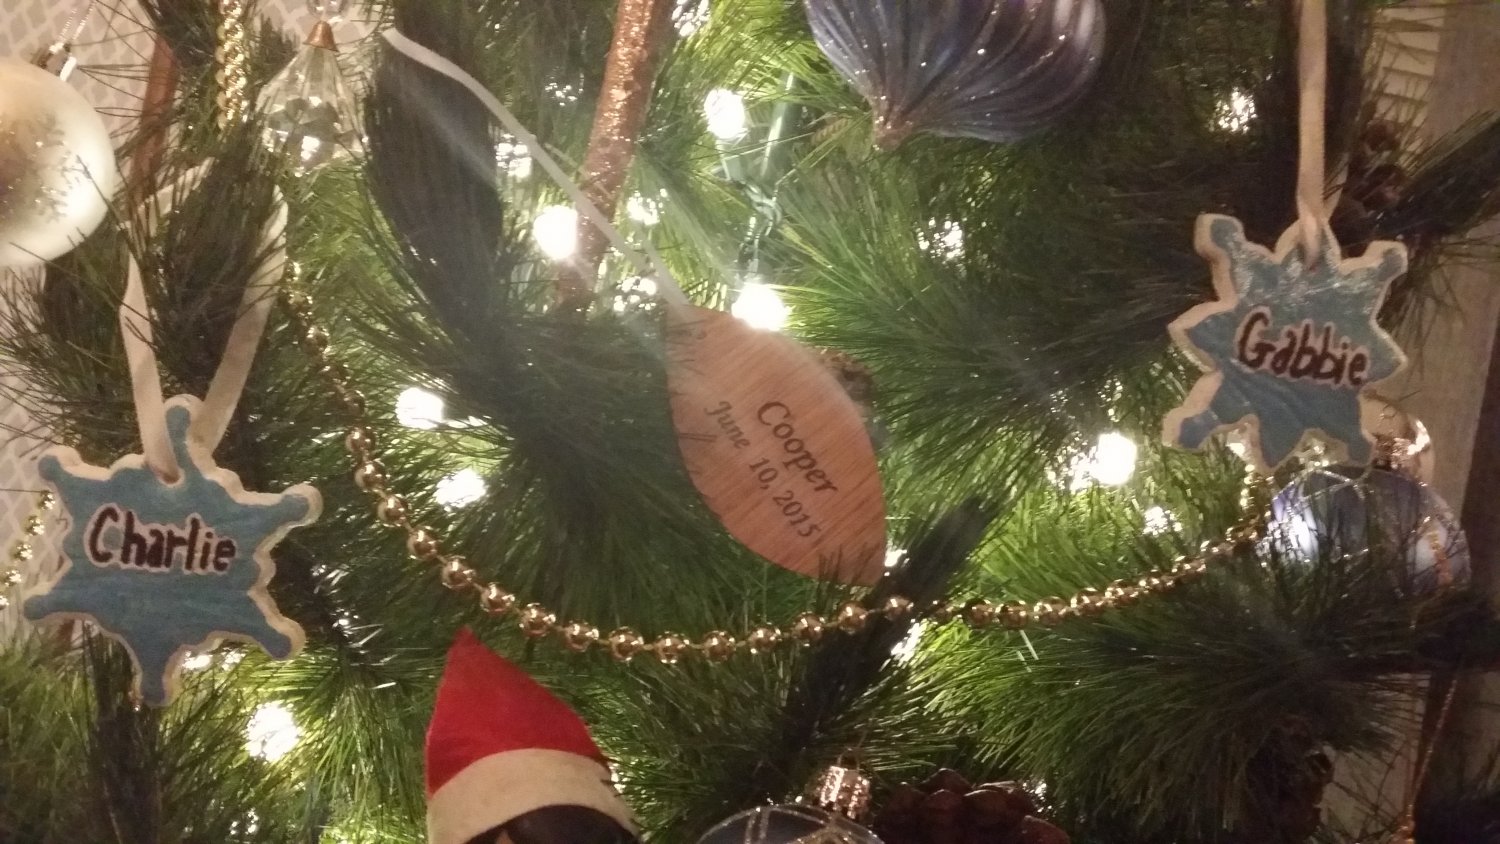 Close-up of Christmas tree with children's ornaments